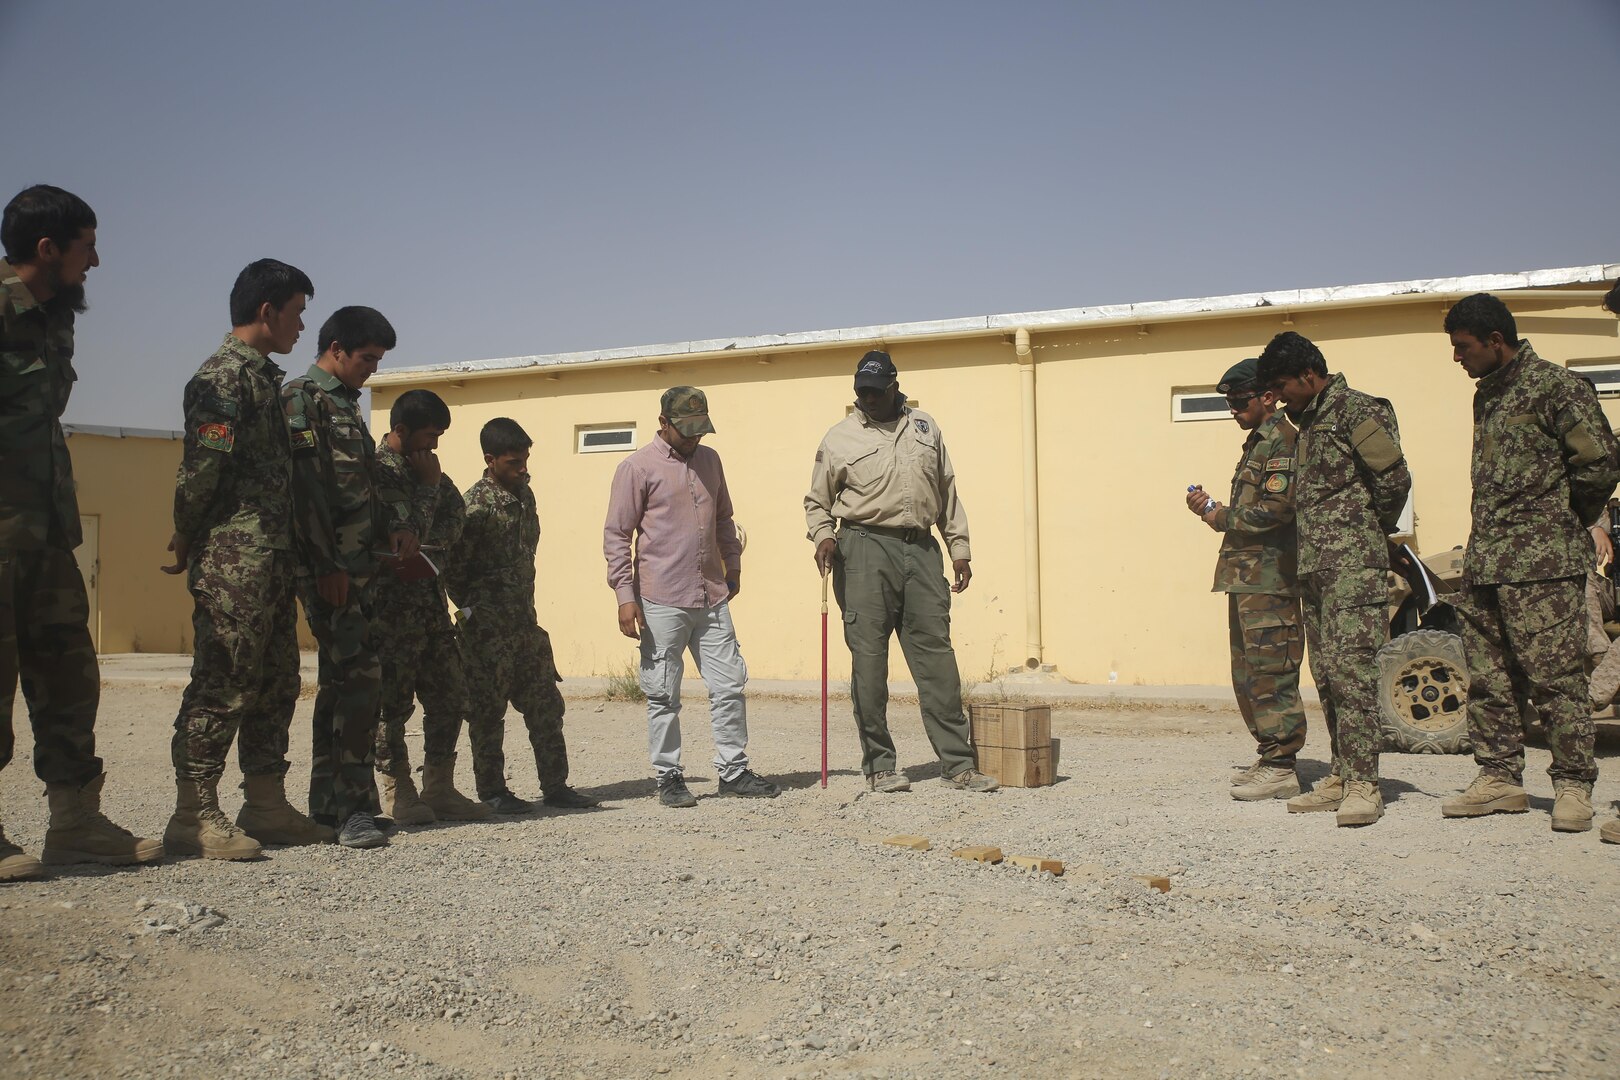 A counter improvised explosive device instructor teaches proper route clearance procedures using a terrain model to Afghan National Army soldiers with 215th Corps at Camp Shorabak, Afghanistan, July 13, 2017. Several U.S. Marine advisors with Task Force Southwest and instructors began a route clearance course July 8, which is designed to help improve the mobility of ANA forces in Helmand Province. (U.S. Marine Corps photo by Sgt. Lucas Hopkins)